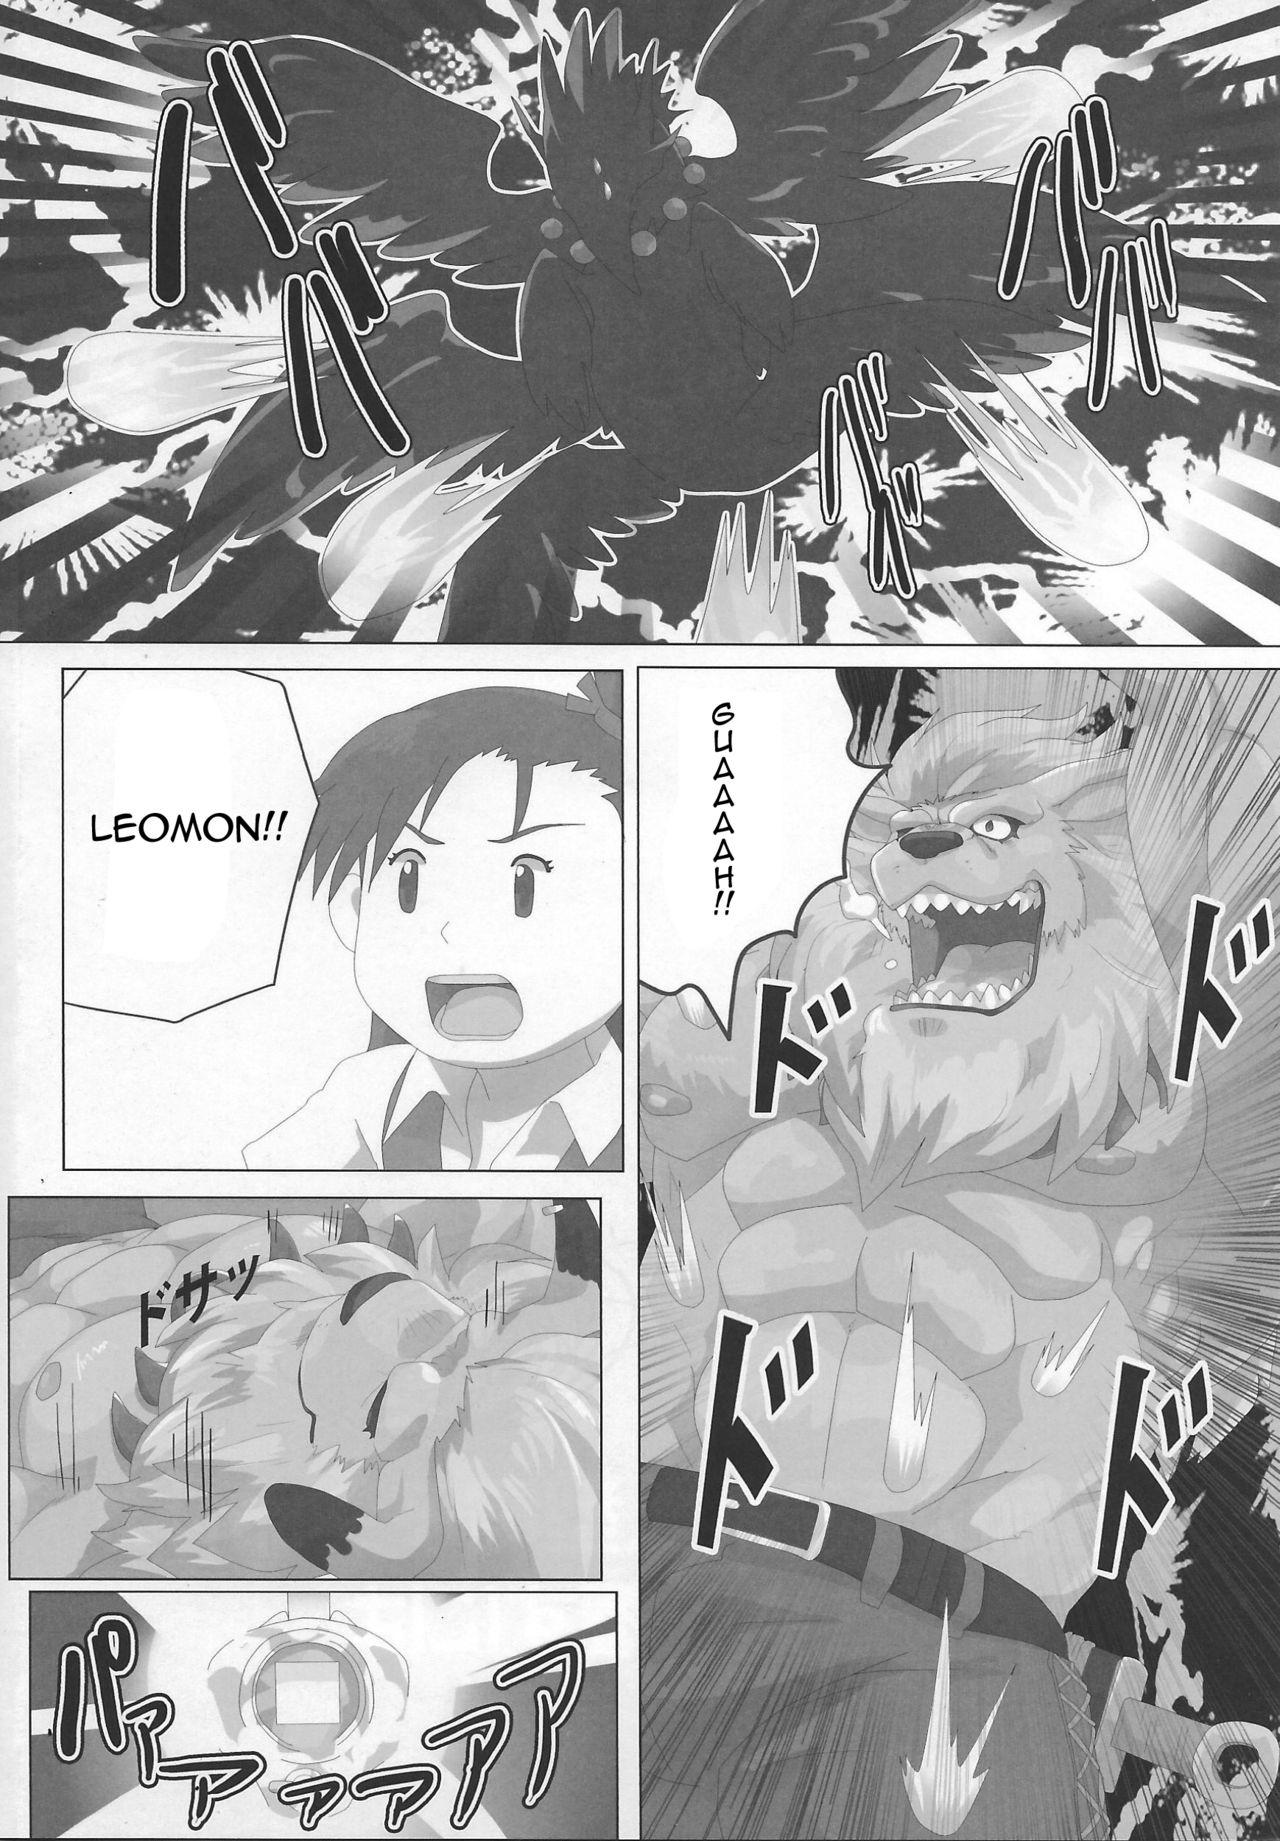 [Debirobu] For the Lion-Man Type Electric Life Form to Overturn Fate - Leomon Doujin [ENG] 4